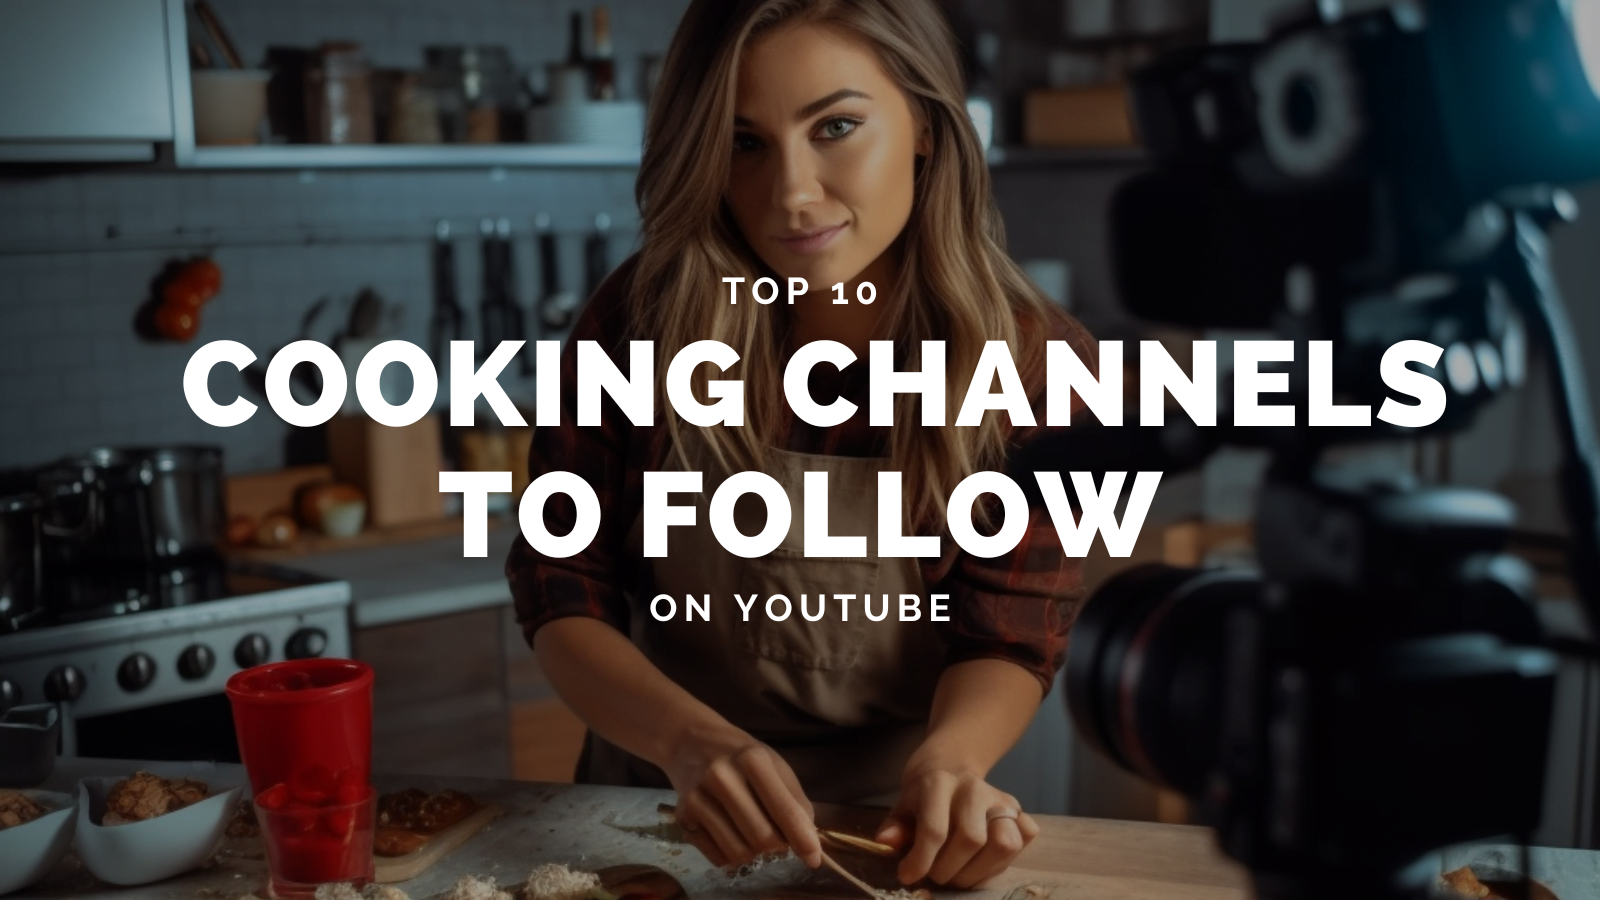 Top 10 Cooking Channels on YouTube